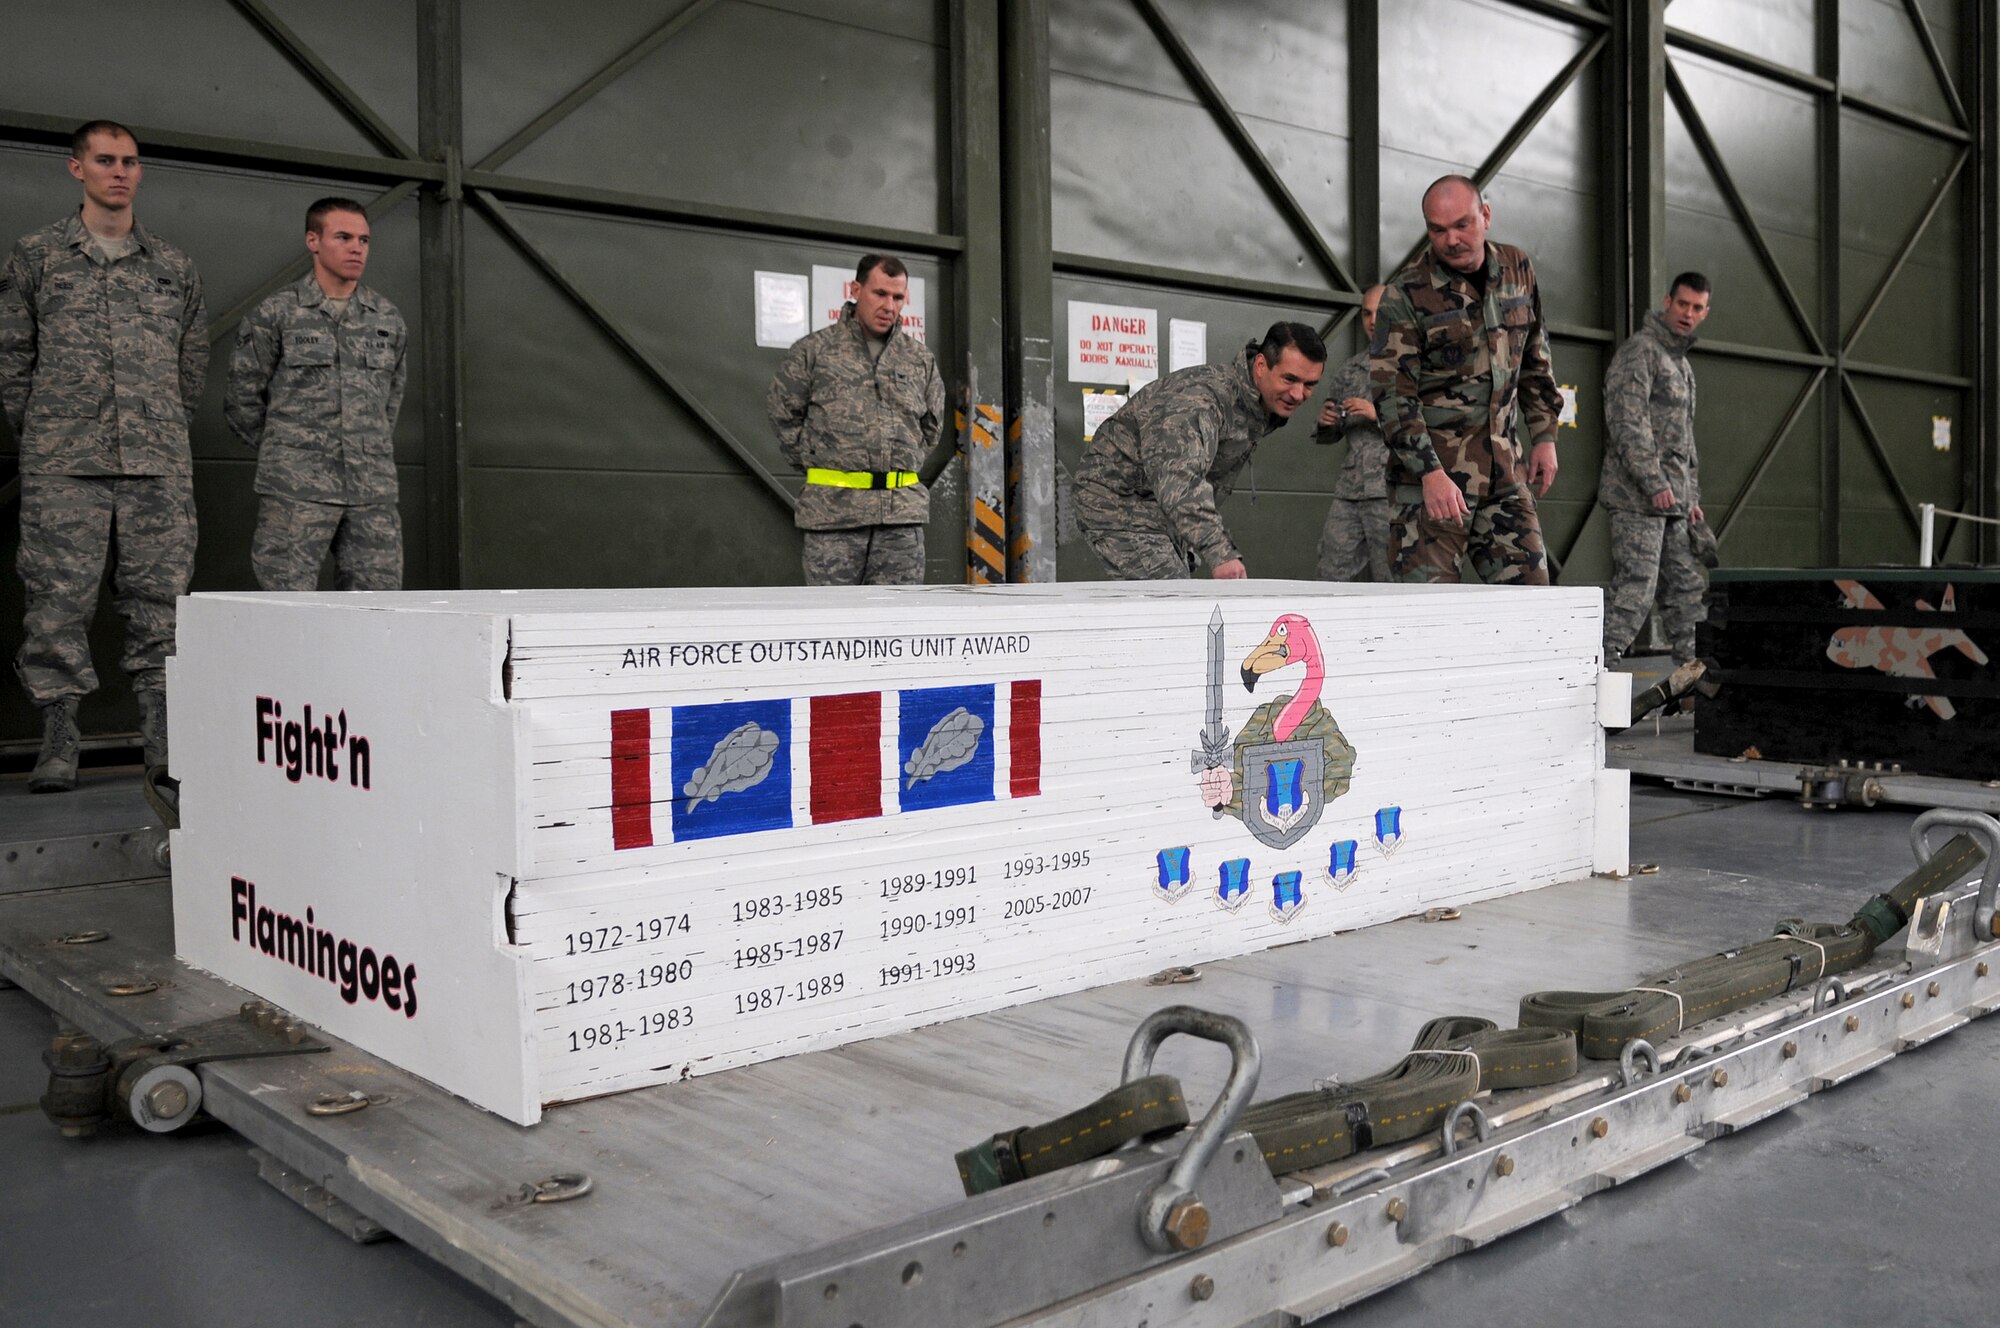 Master Sgt. David Hudson (right), 435th Logistics Readiness Squadron Aerial Delivery Riggers, presents a 435th Air Base Wing painted heavy-cargo box to Col. Donald Bacon, 435 ABW commander at Ramstein Air Base Jan. 16, 2009. Airmen in the 435th LRS painted each of the heavy-cargo boxes with different tributes to military and U.S. events such as September 11 and Pearl Harbor. Their latest tribute was to Colonel Bacon and the 435th ABW. (U.S. Air Force photo by Airman 1st Class Grovert Fuentes-Contreras)